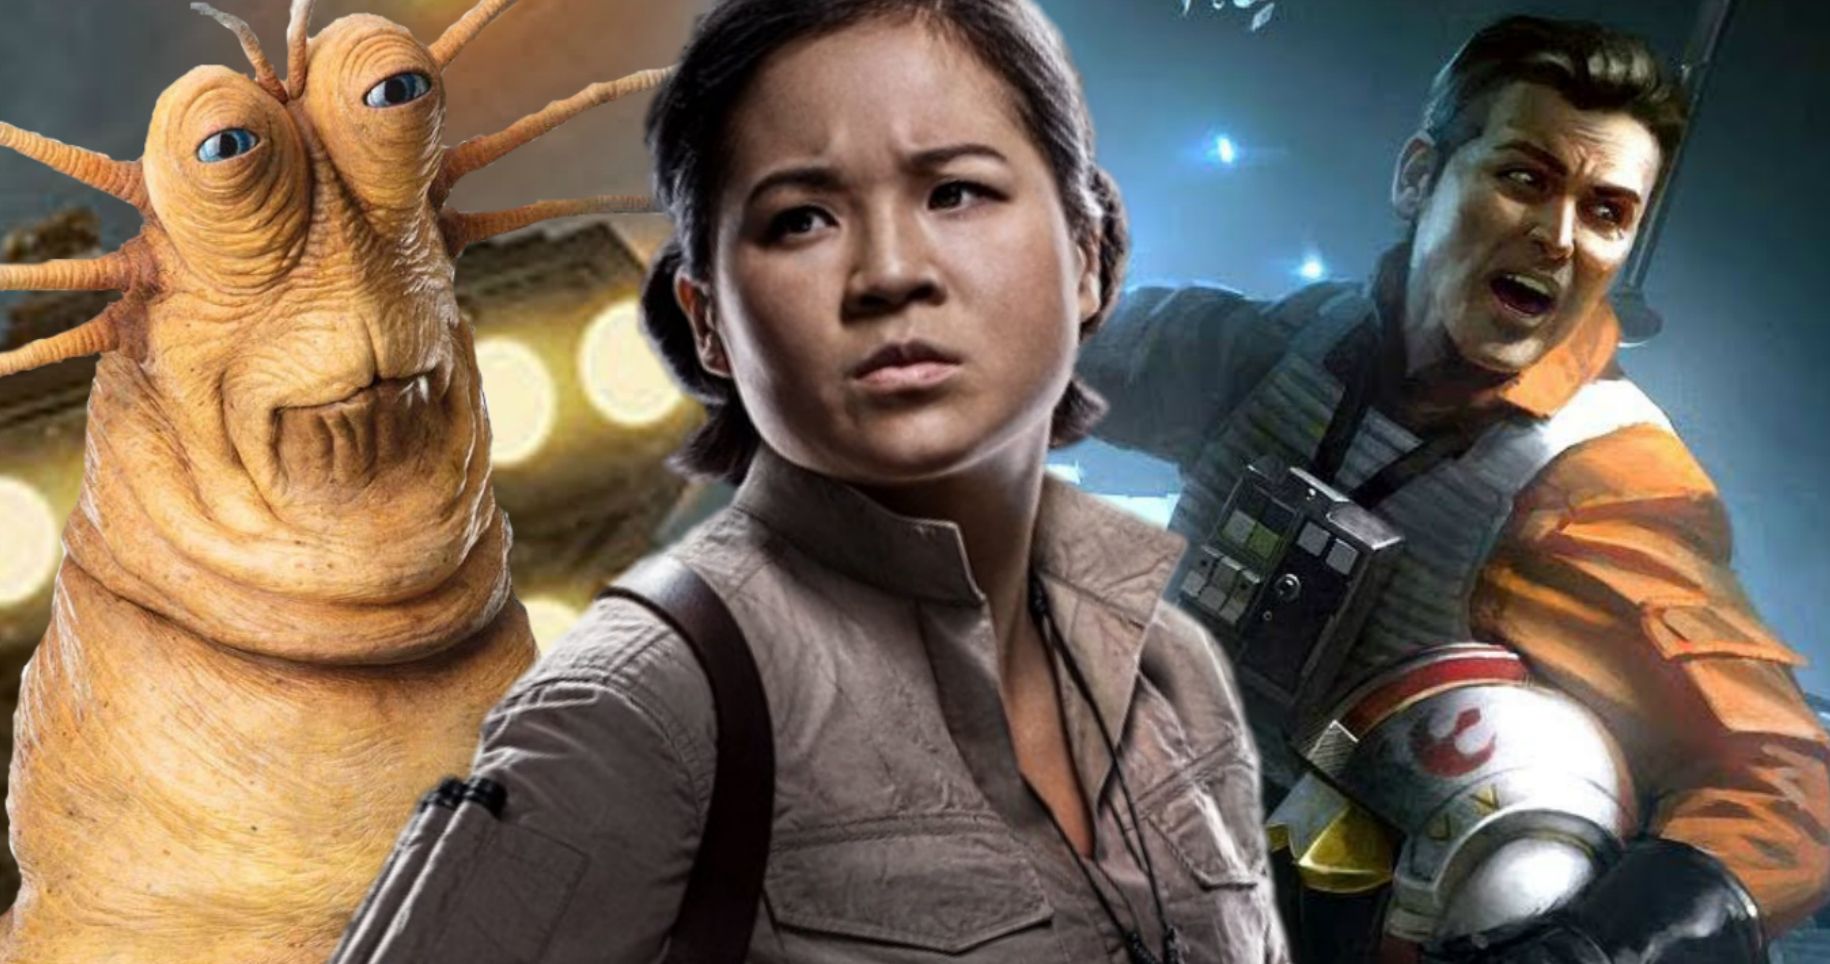 Fan-Proposed Rose Tico Disney+ Series Gets Big Boost from Crazy Rich ...